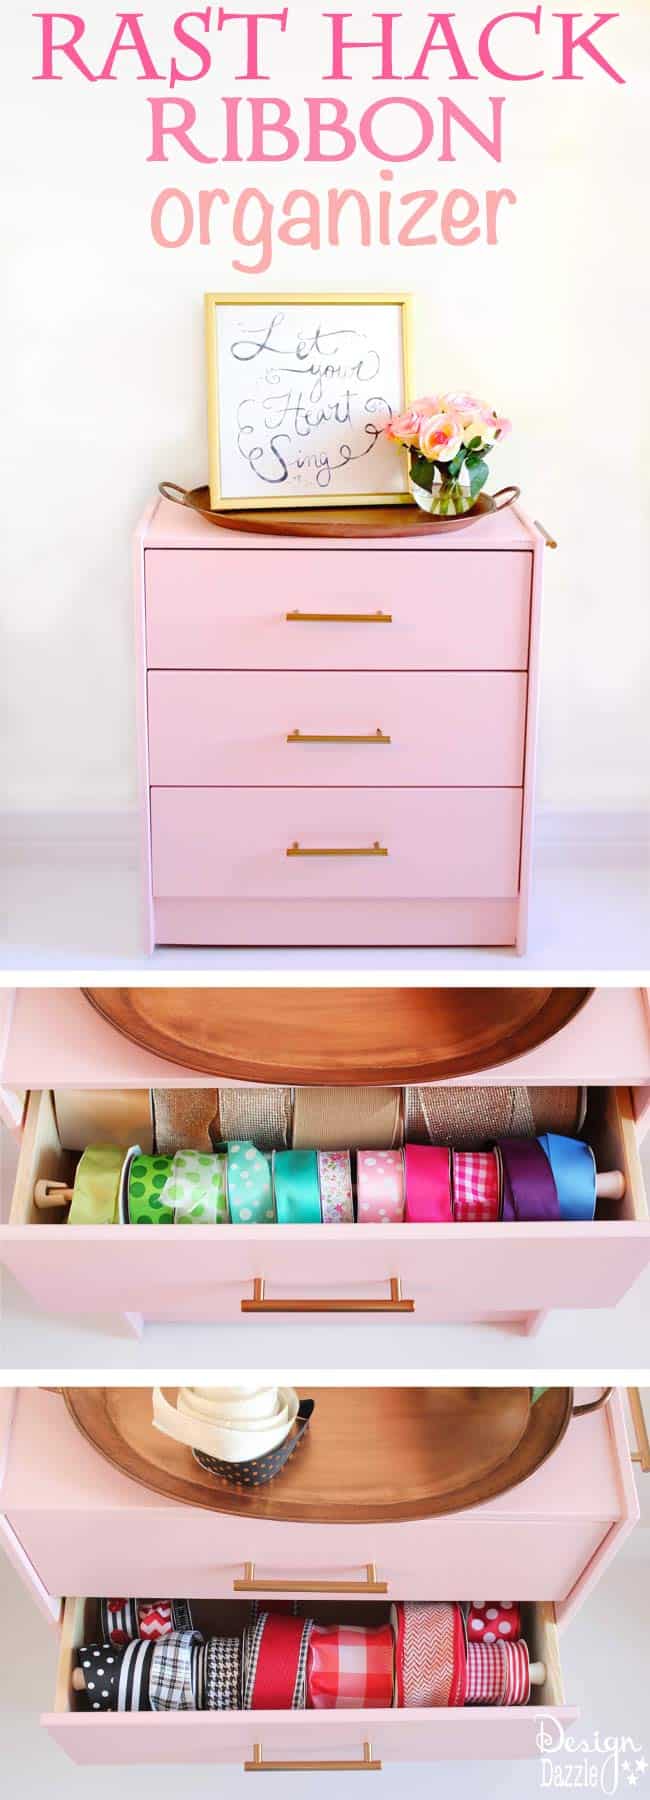 Use a Rast dresser to create a simple hack: RIBBON ORGANIZER!! Super easy and super cute. It's even on caster wheels so I can roll it under my craft table! Design Dazzle